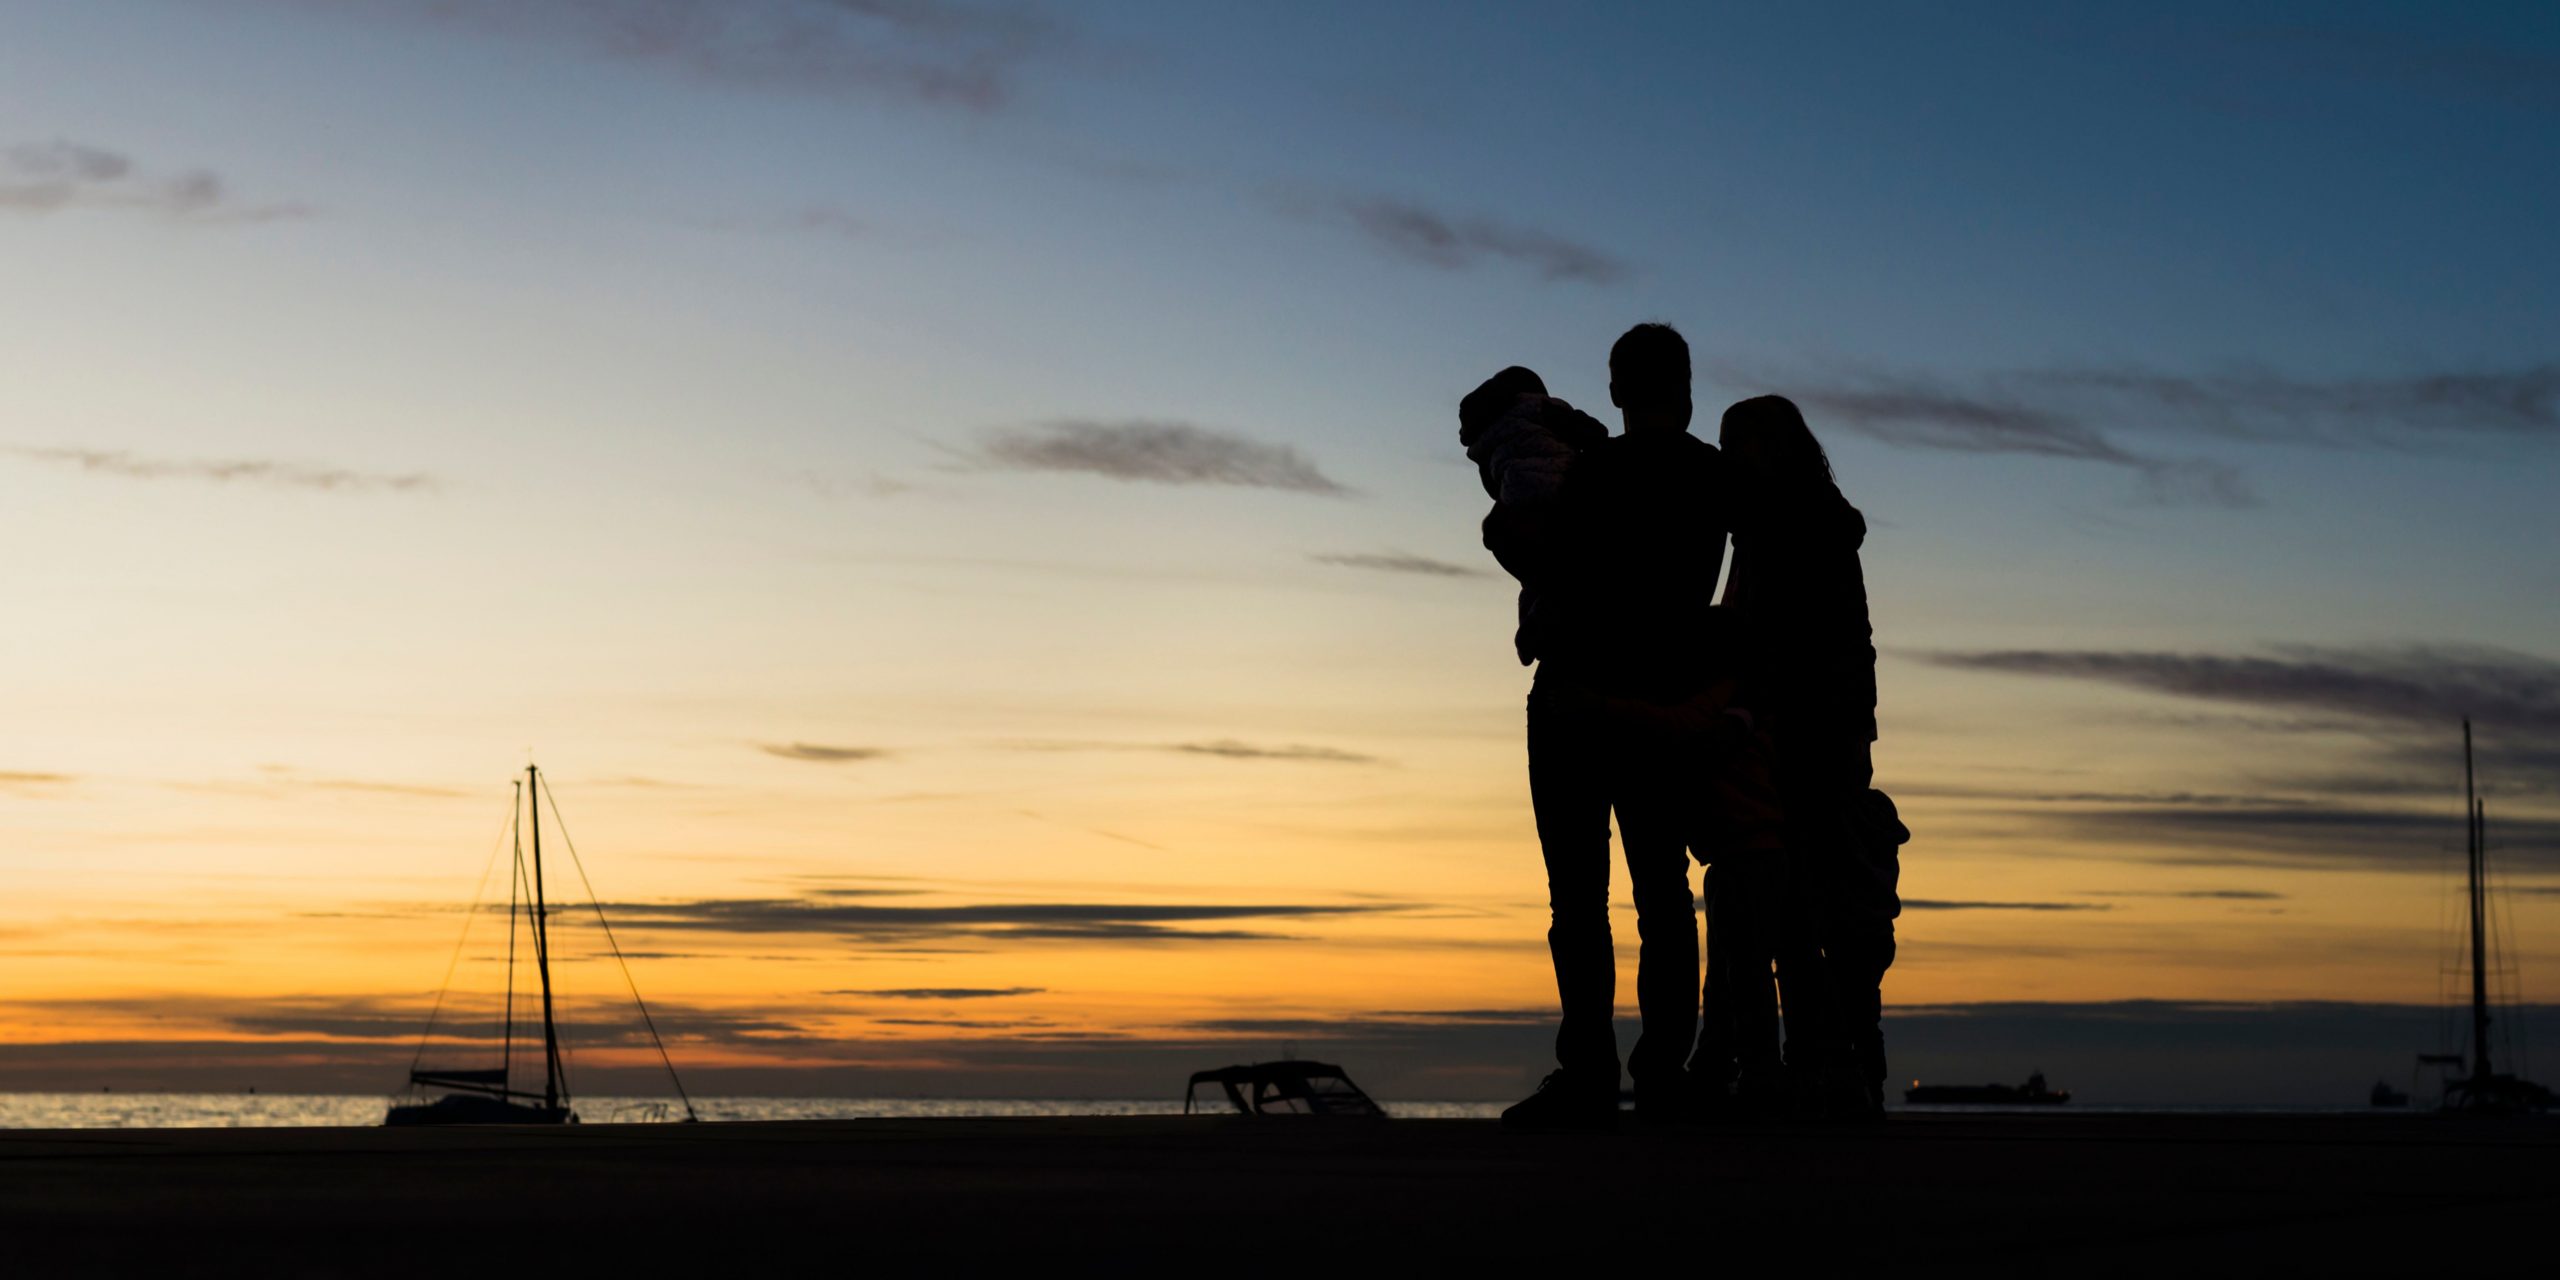 Two adults, one holding a child, silhouetted against a yellow and blue sunset by the sea.